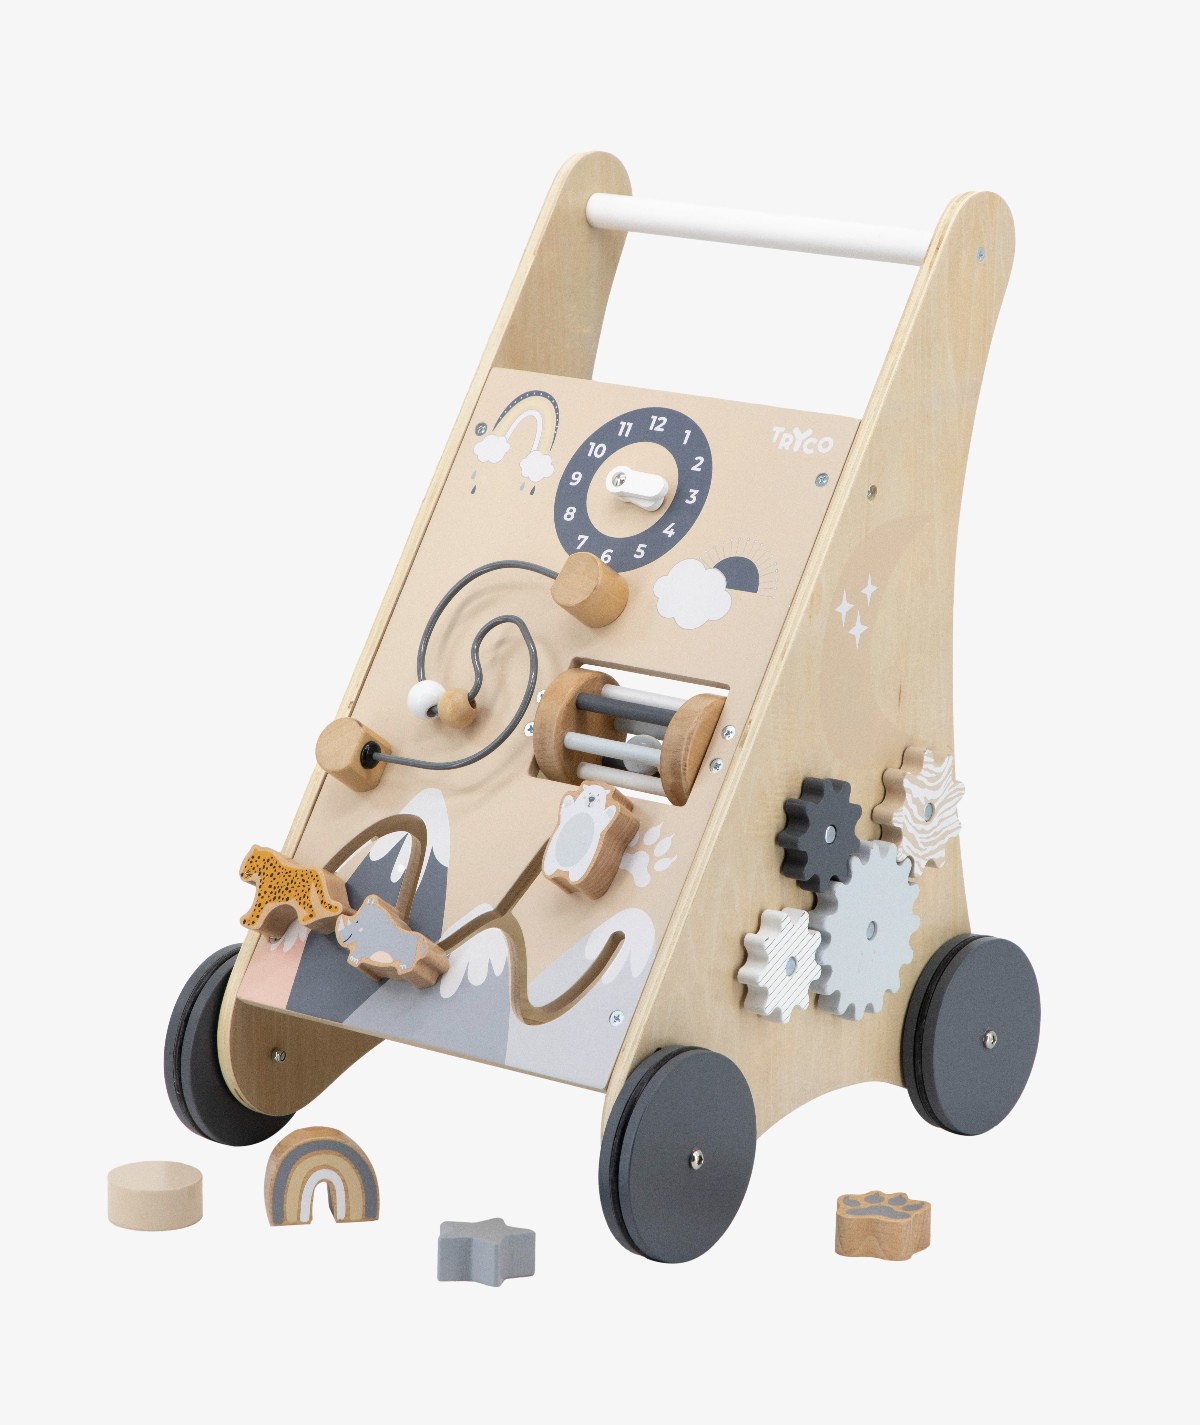 Tryco Nature Wooden Baby Activity Stroller ♥ Tryco Baby ♥